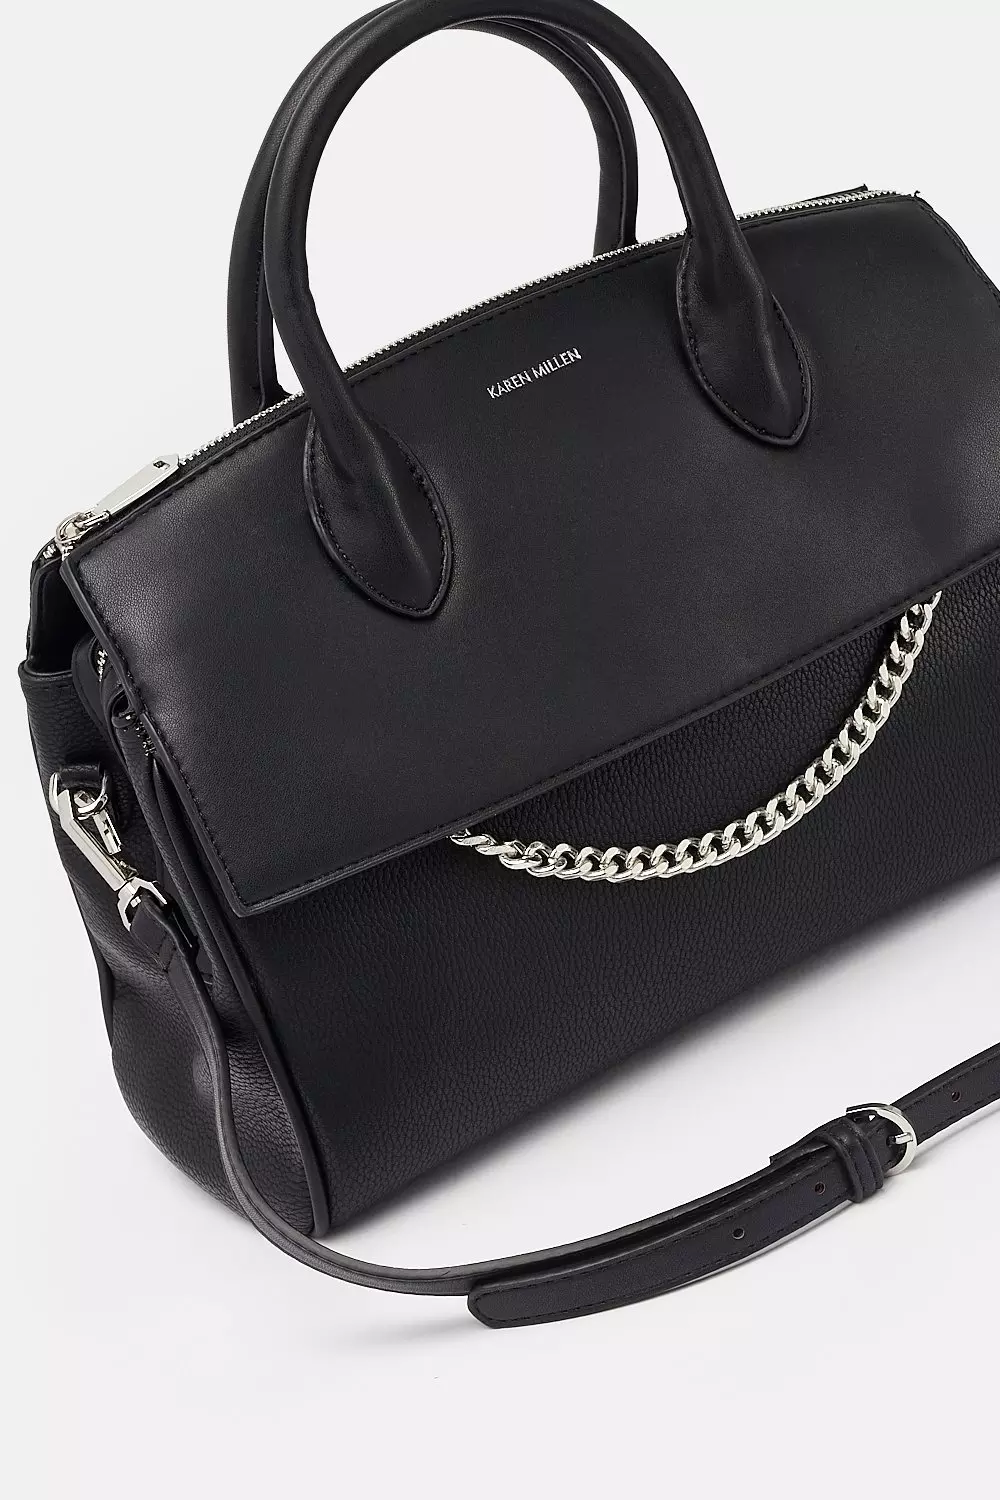 The Karen Star Print Bag from Ash Footwear comes in Black Leather